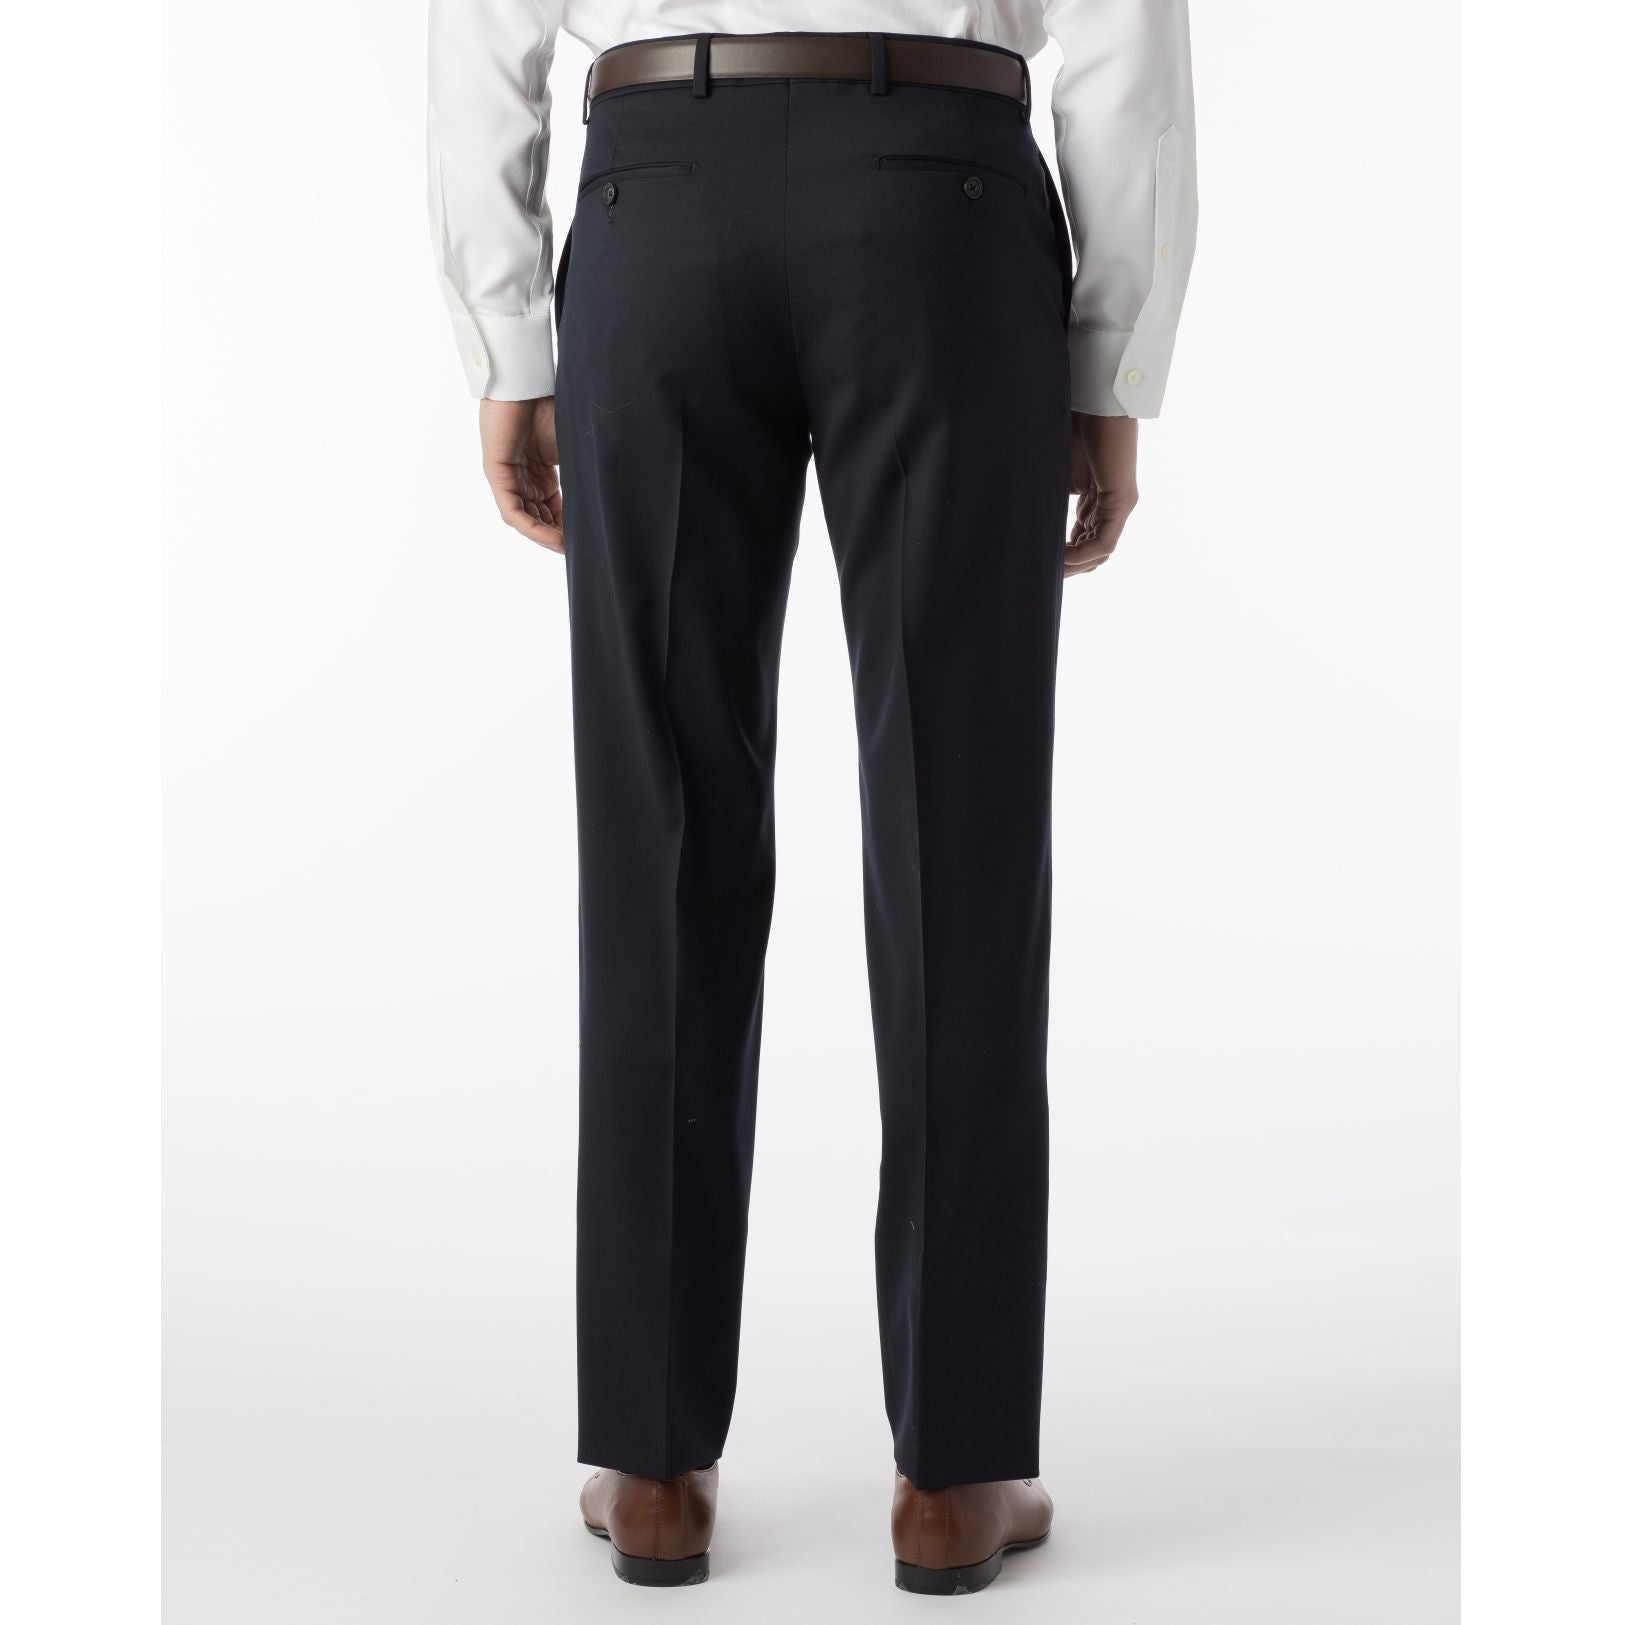 Super 120s Wool Gabardine Comfort-EZE Trouser in Navy, Size 30 (Dunhill Traditional Fit) by Ballin